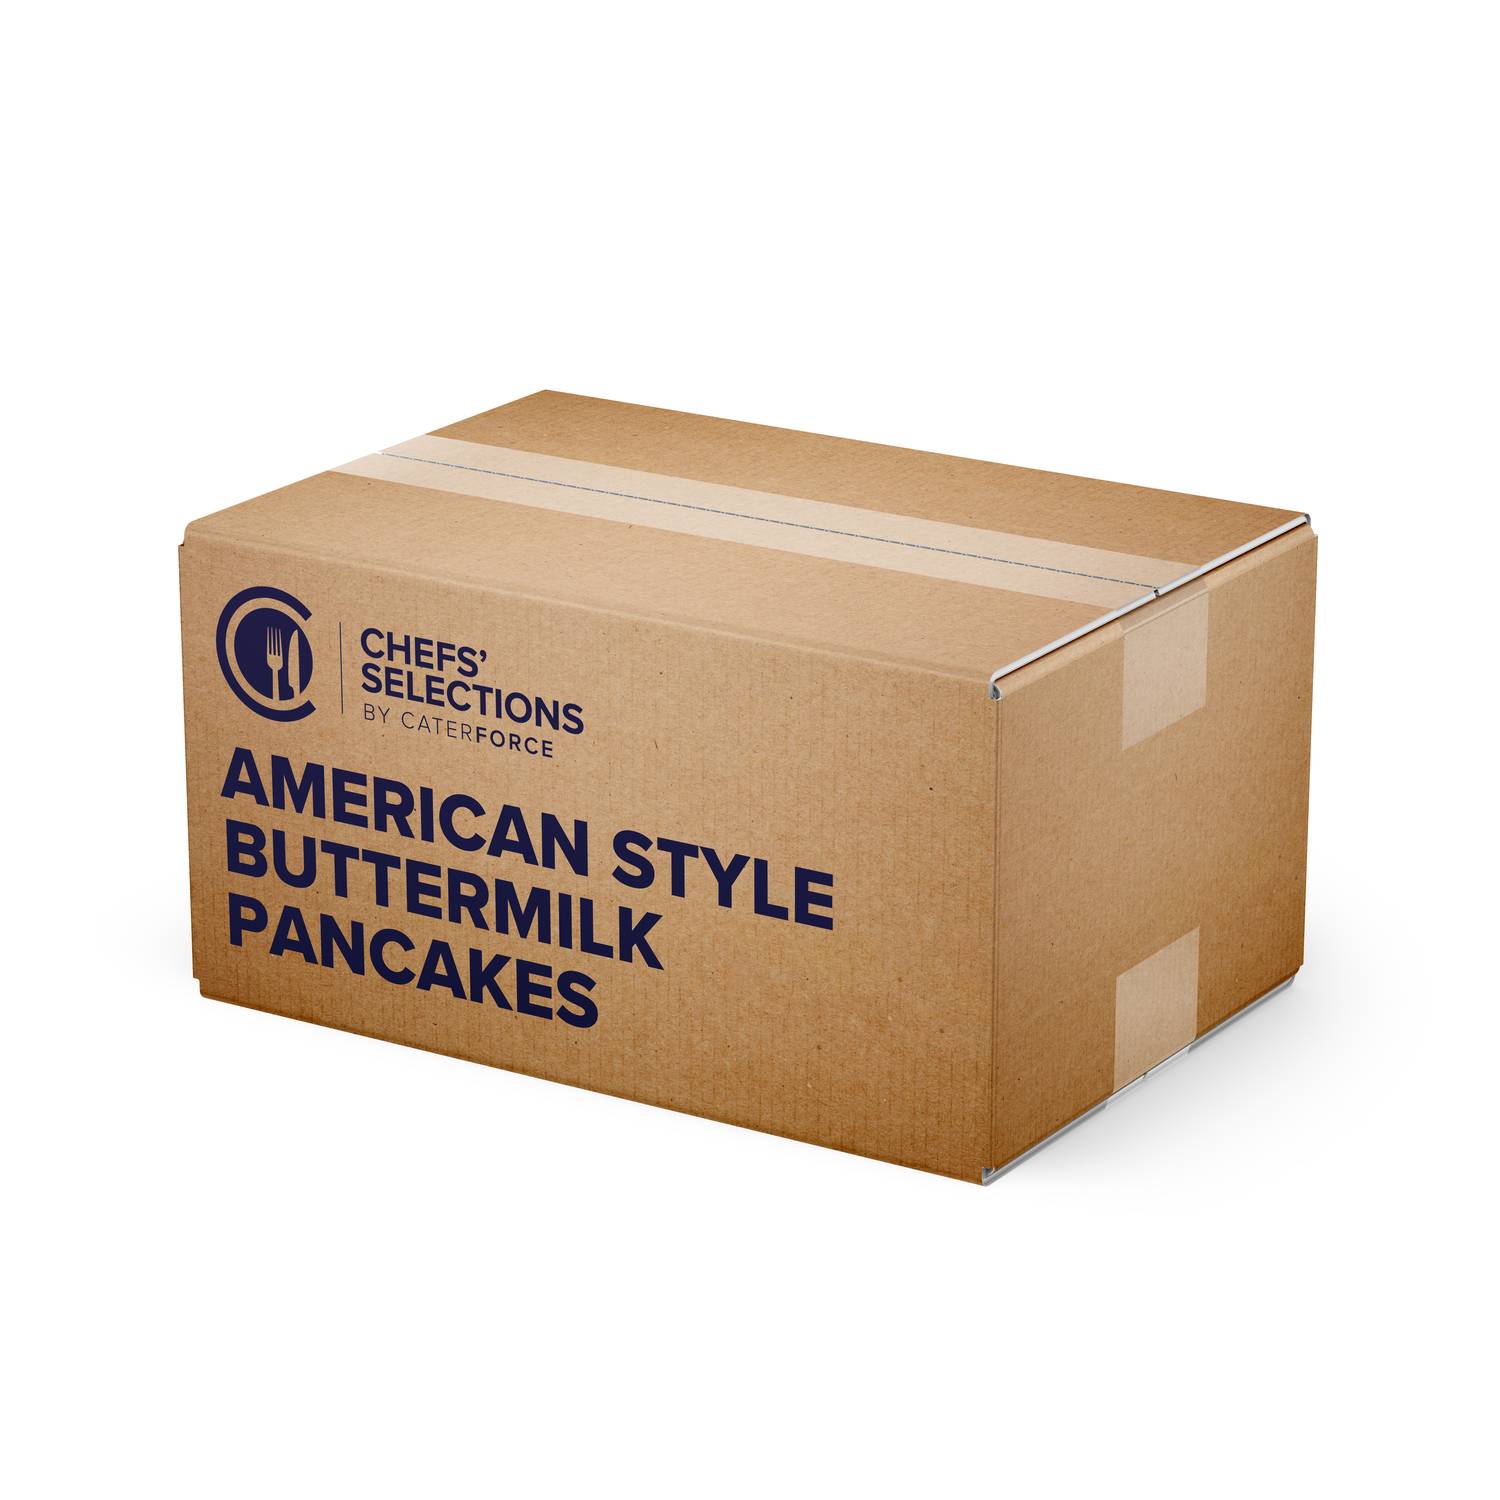 Chefs’ Selections American Style Buttermilk Pancakes (120 x 40g)